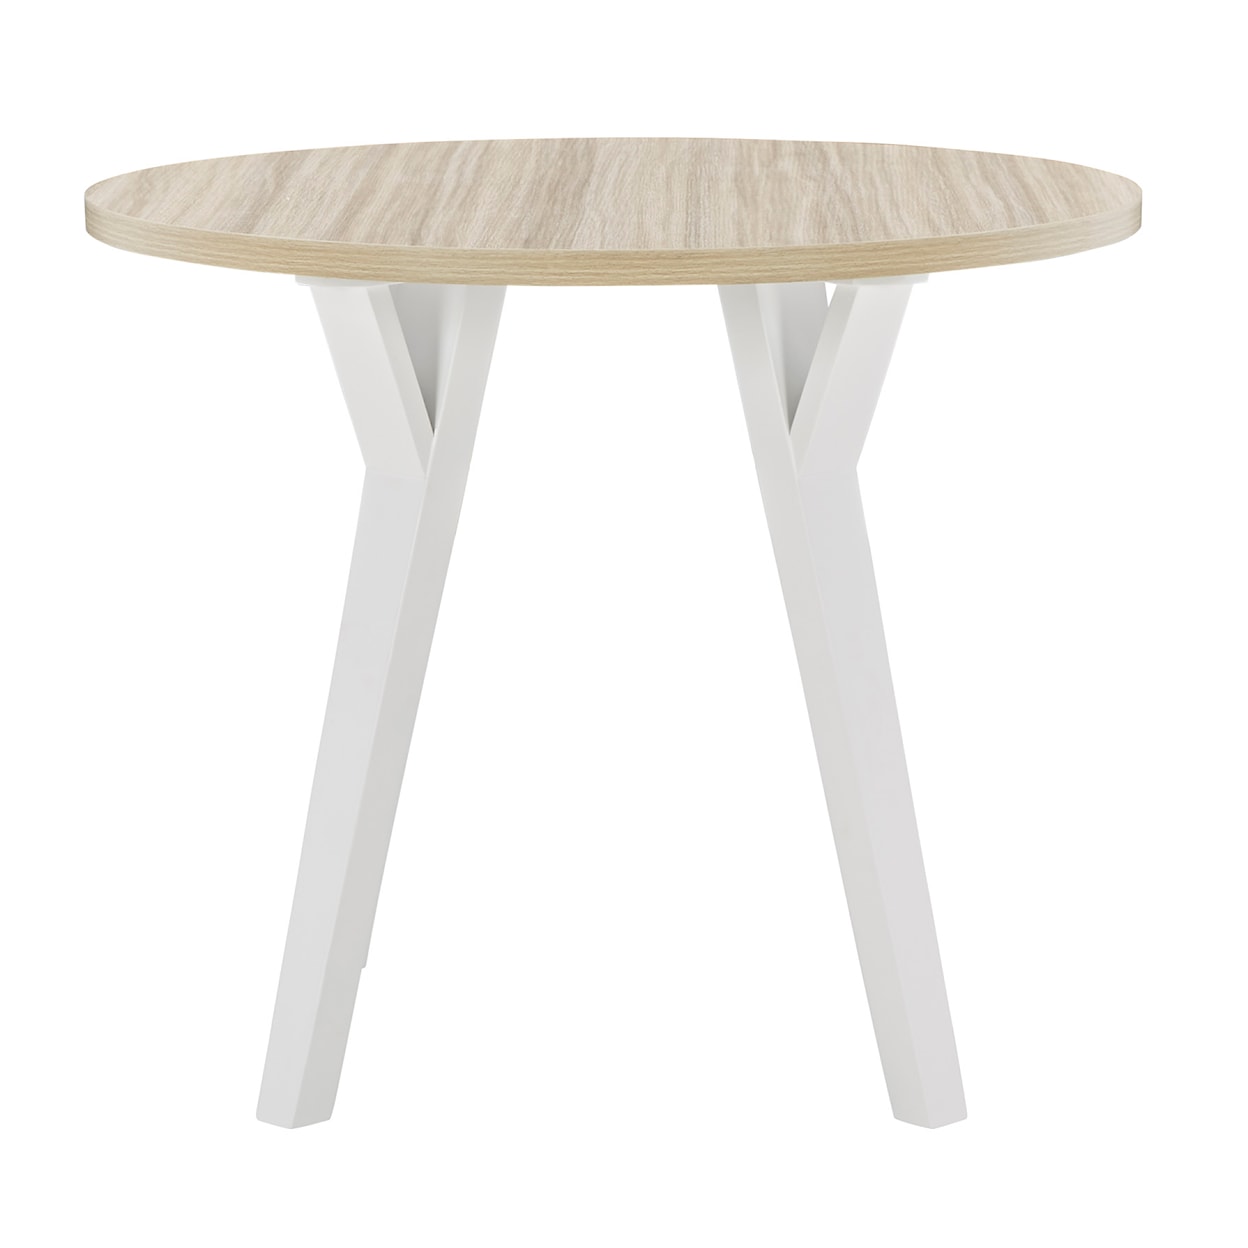 Signature Design by Ashley Grannen Dining Table